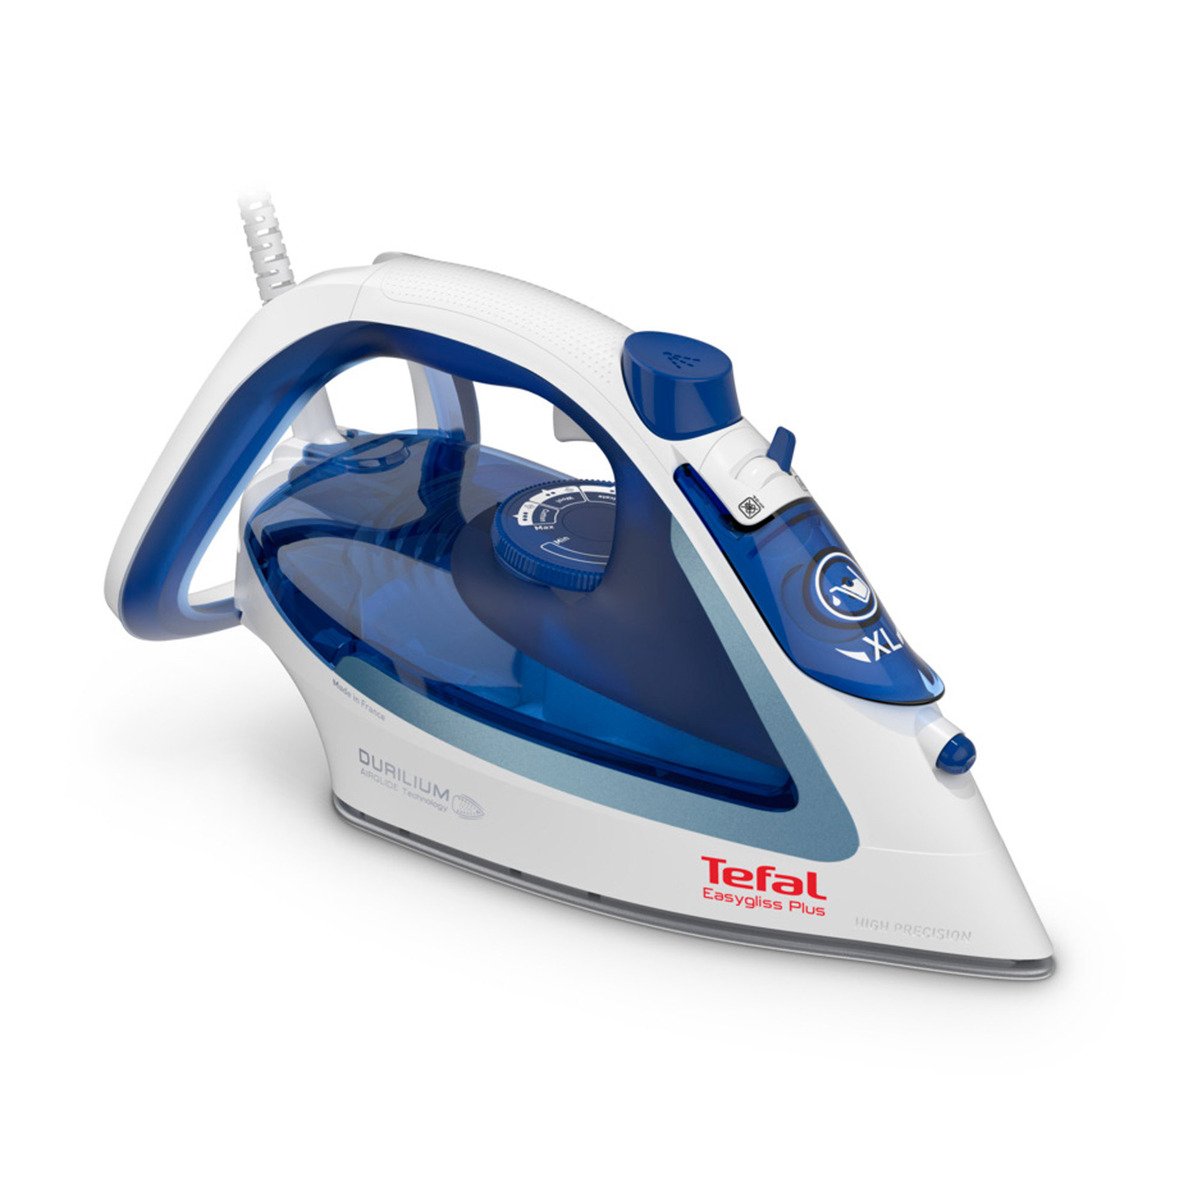 Tefal Steam Iron FV5715M0-E  2400W Made In France